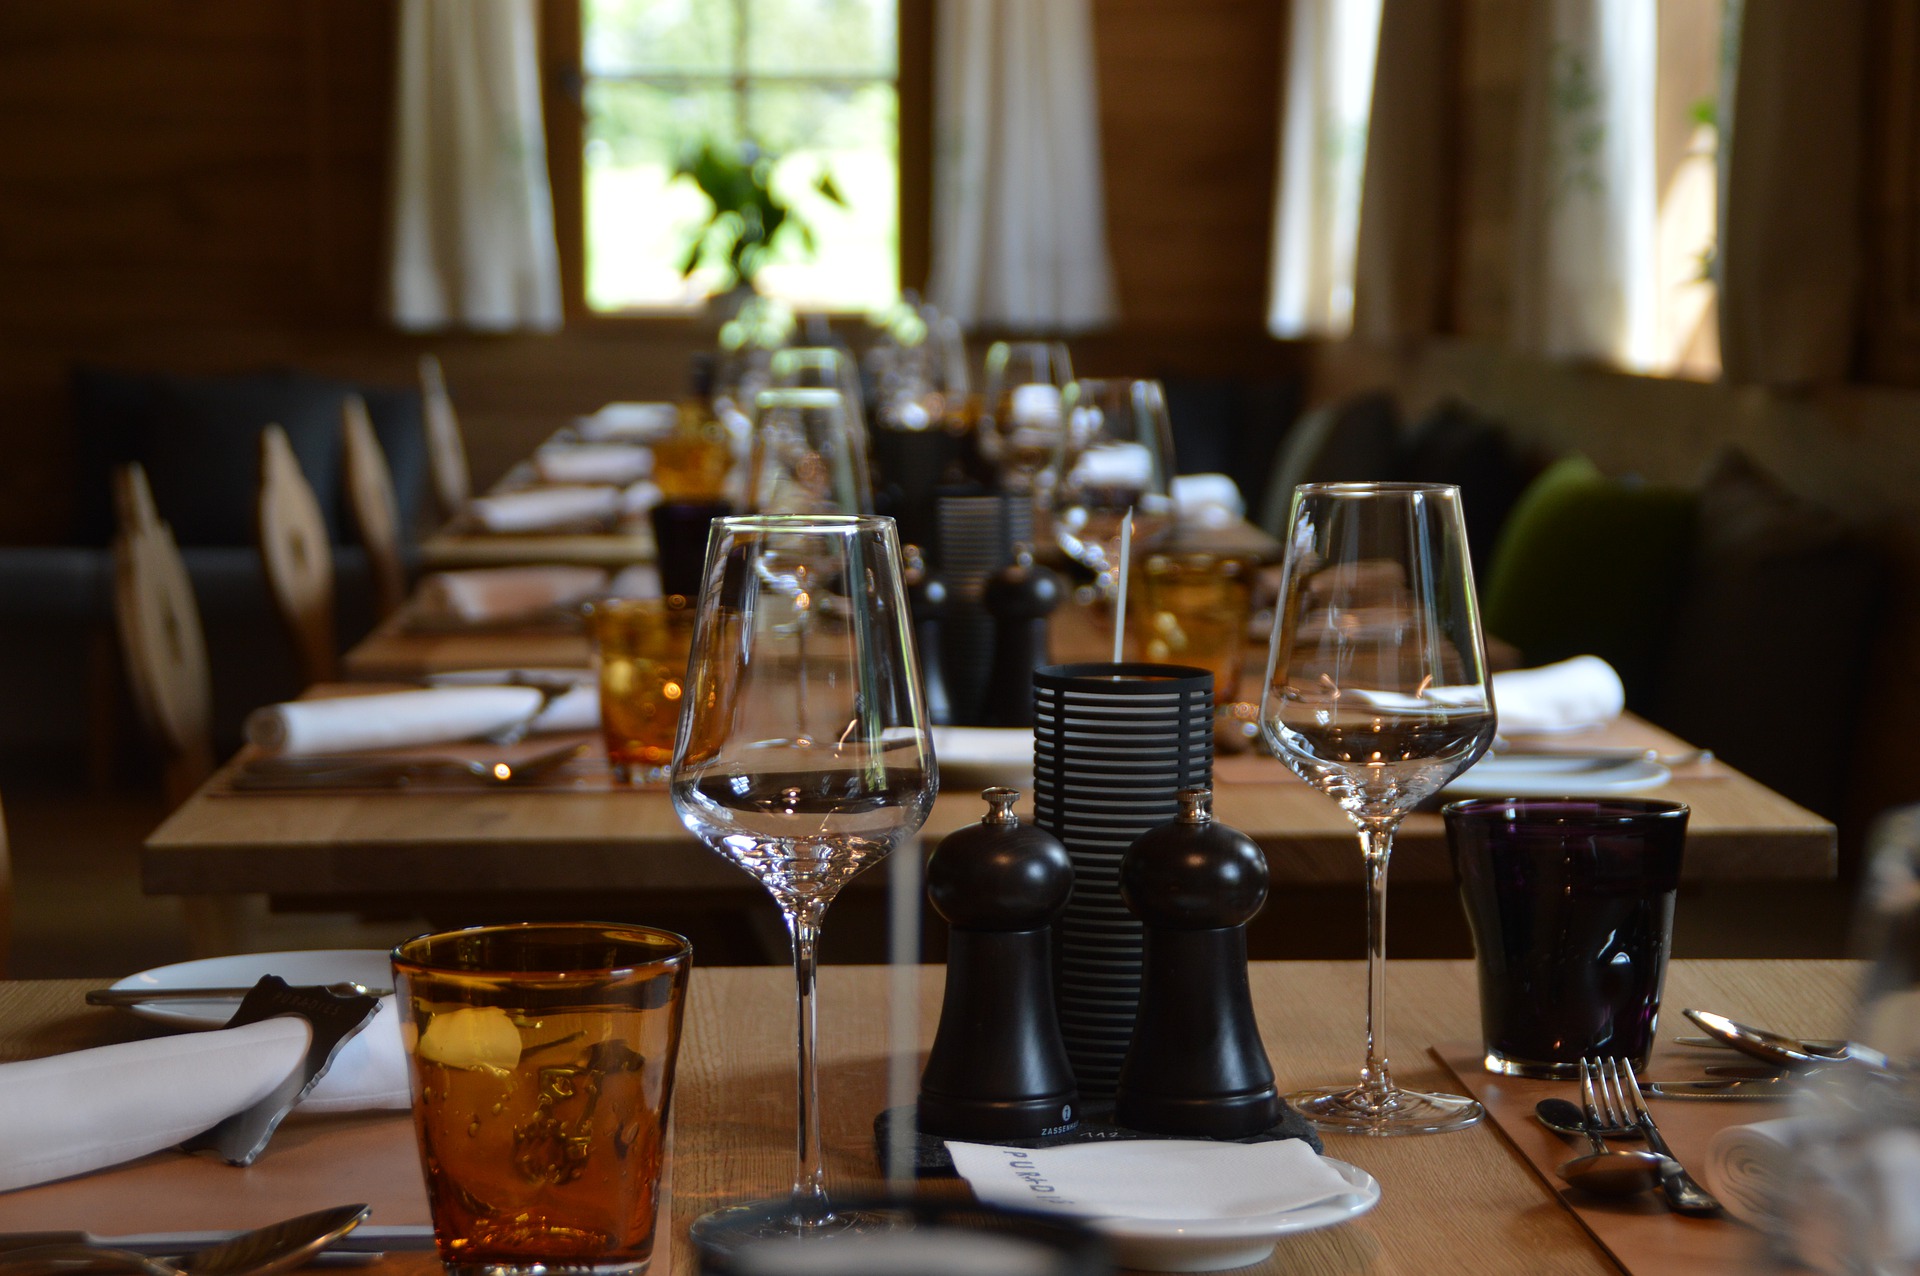 Photo of restaurant table and glasses